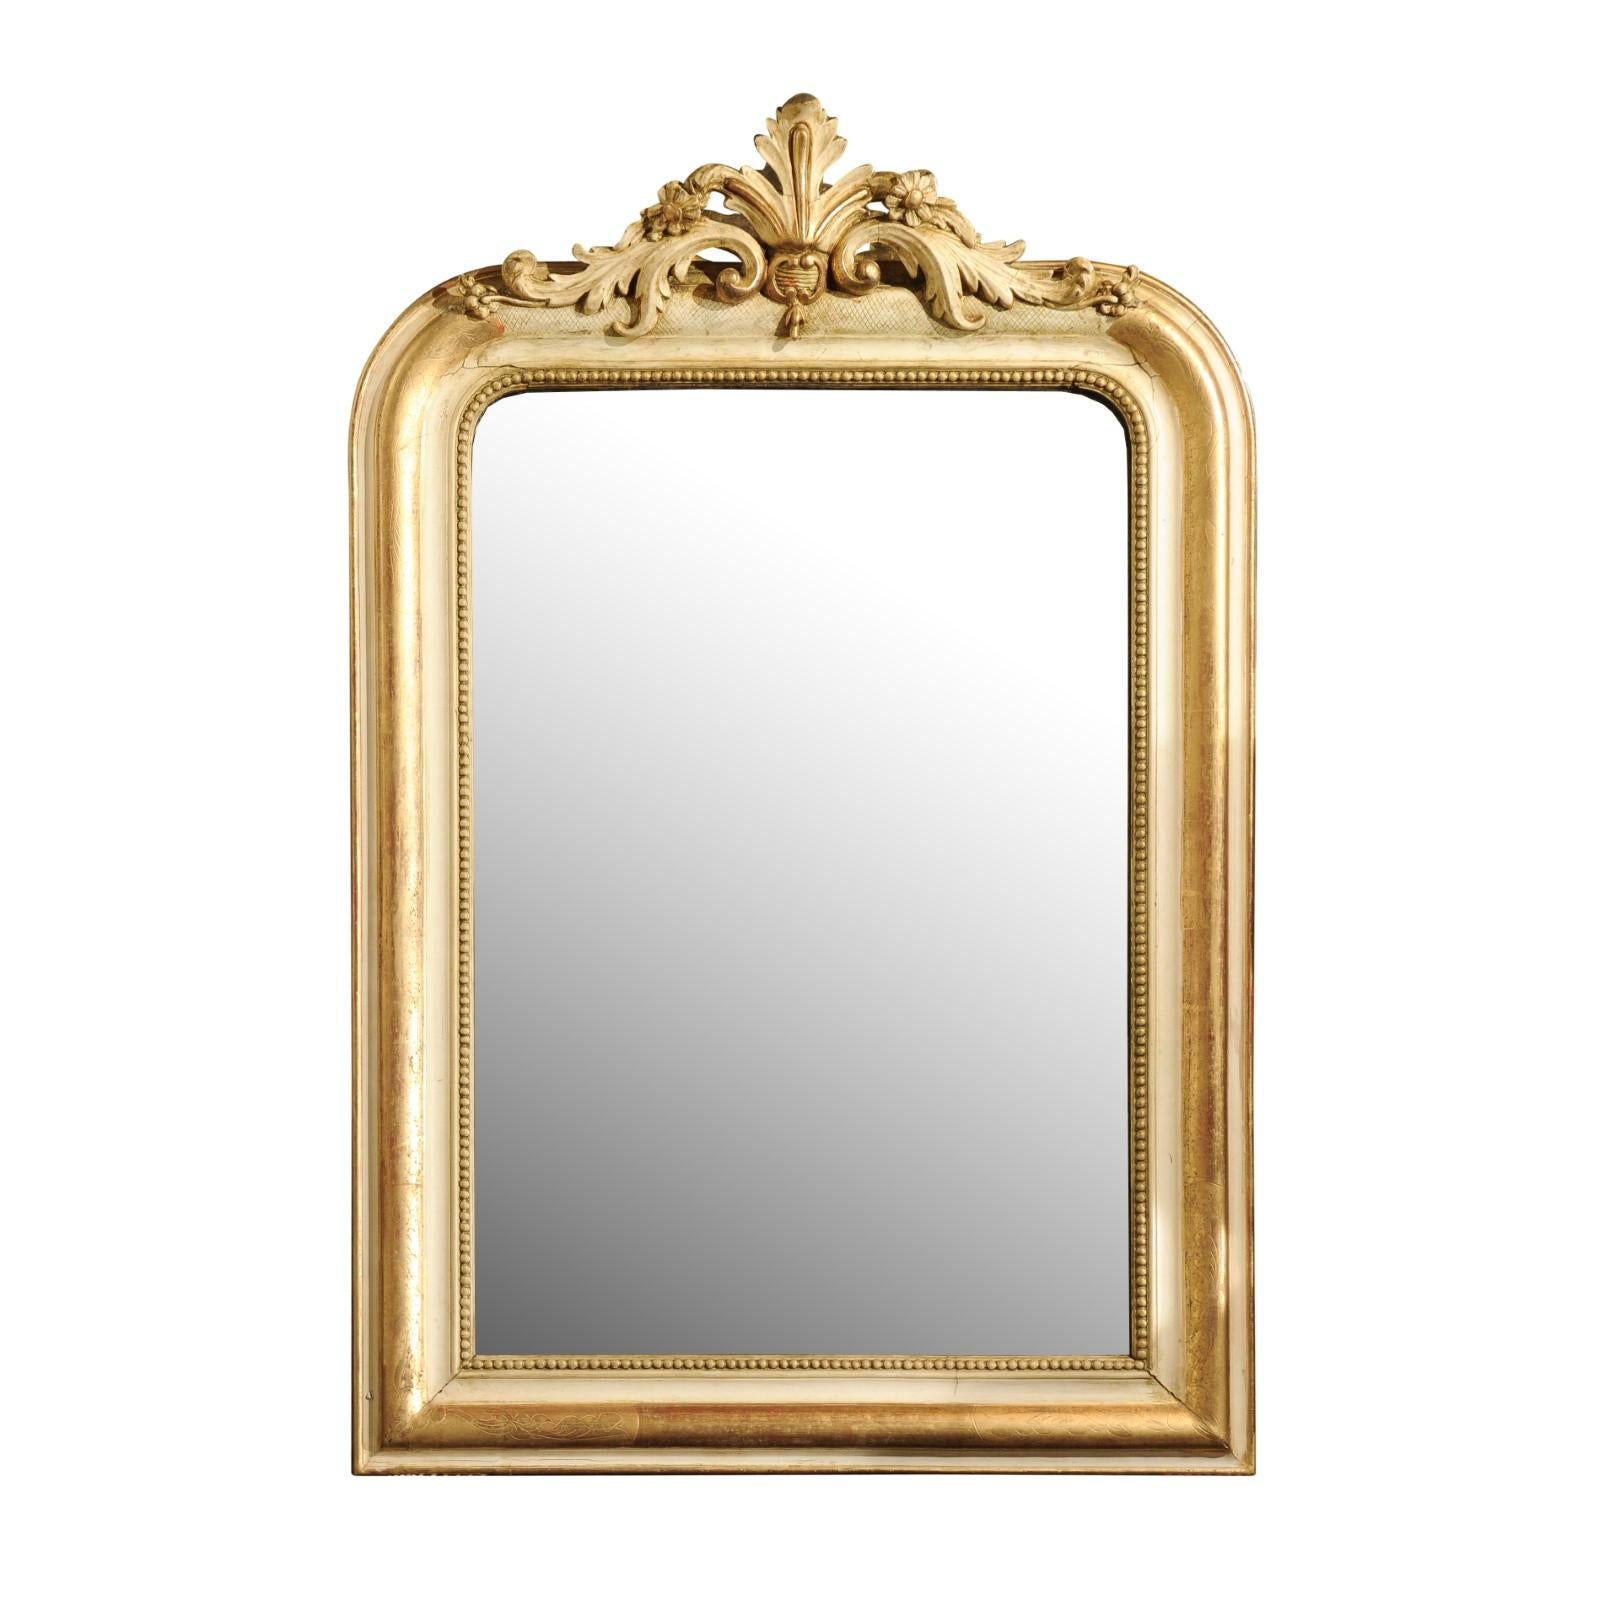 French 19th Century Painted and Parcel-Gilt Mirror with Acanthus Carved Crest